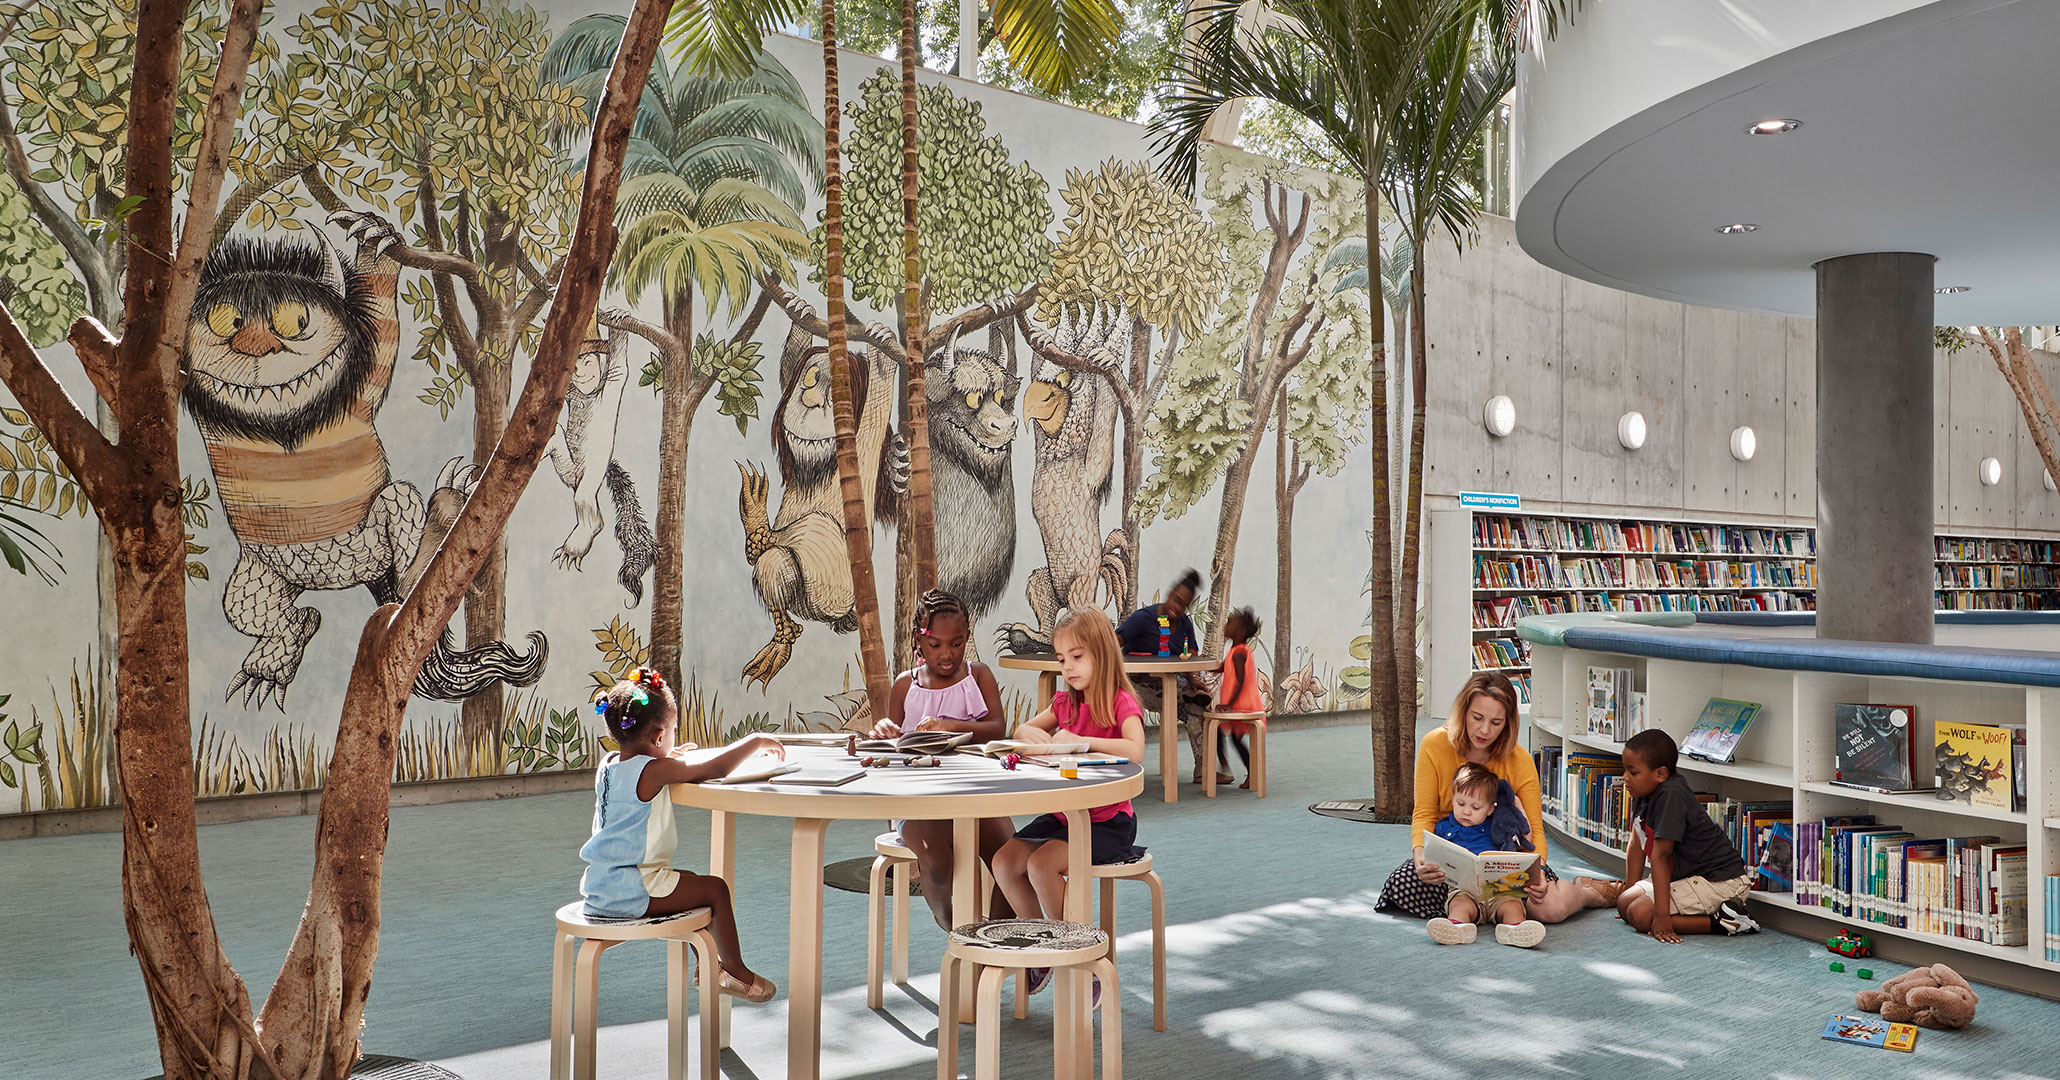 Boudreaux designed children’s educational center and modern engaging spaces.